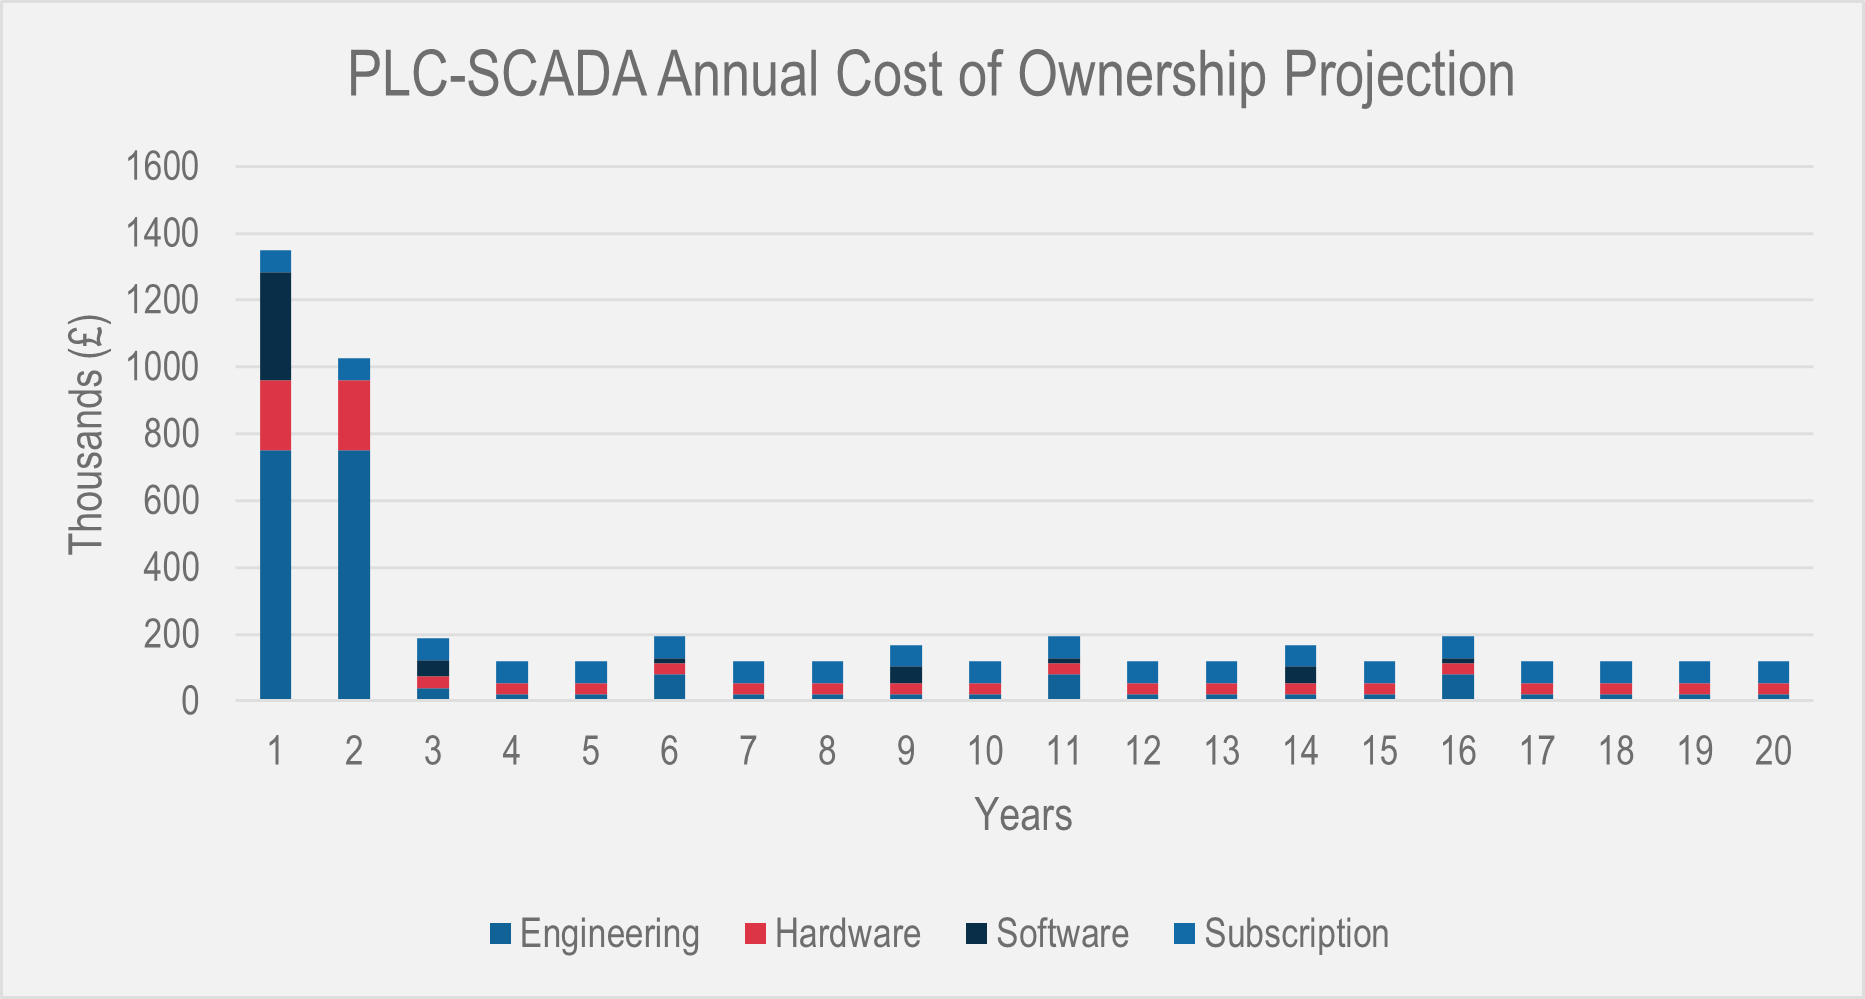 PLC-SCADA annual cost of ownership projection